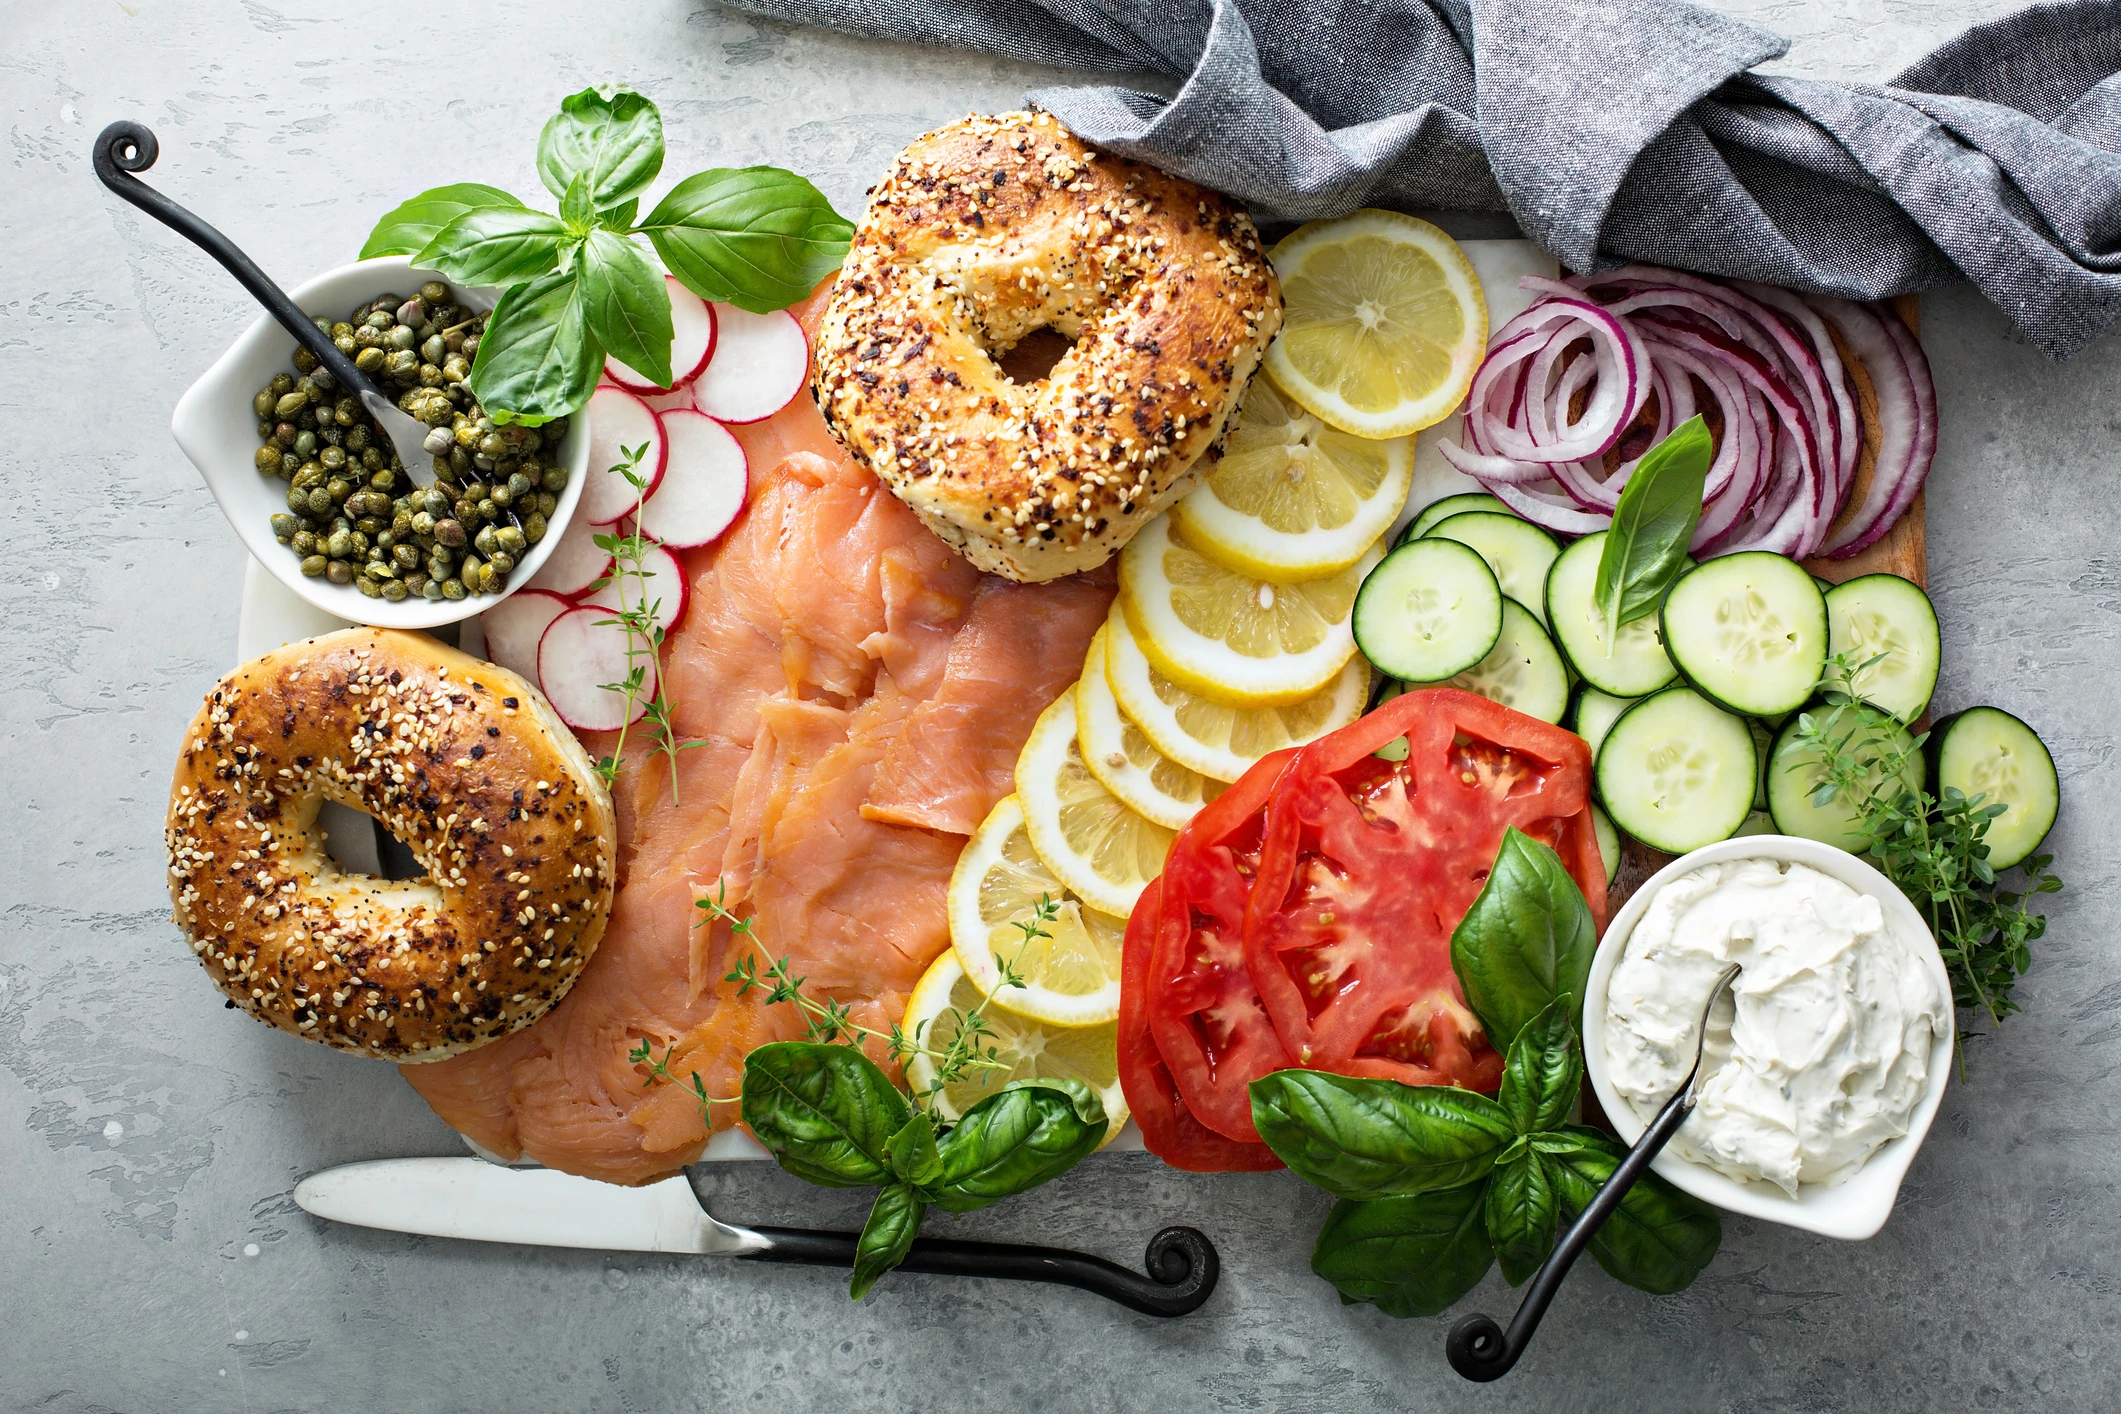 Cream Cheese and Lox Bagel Platter